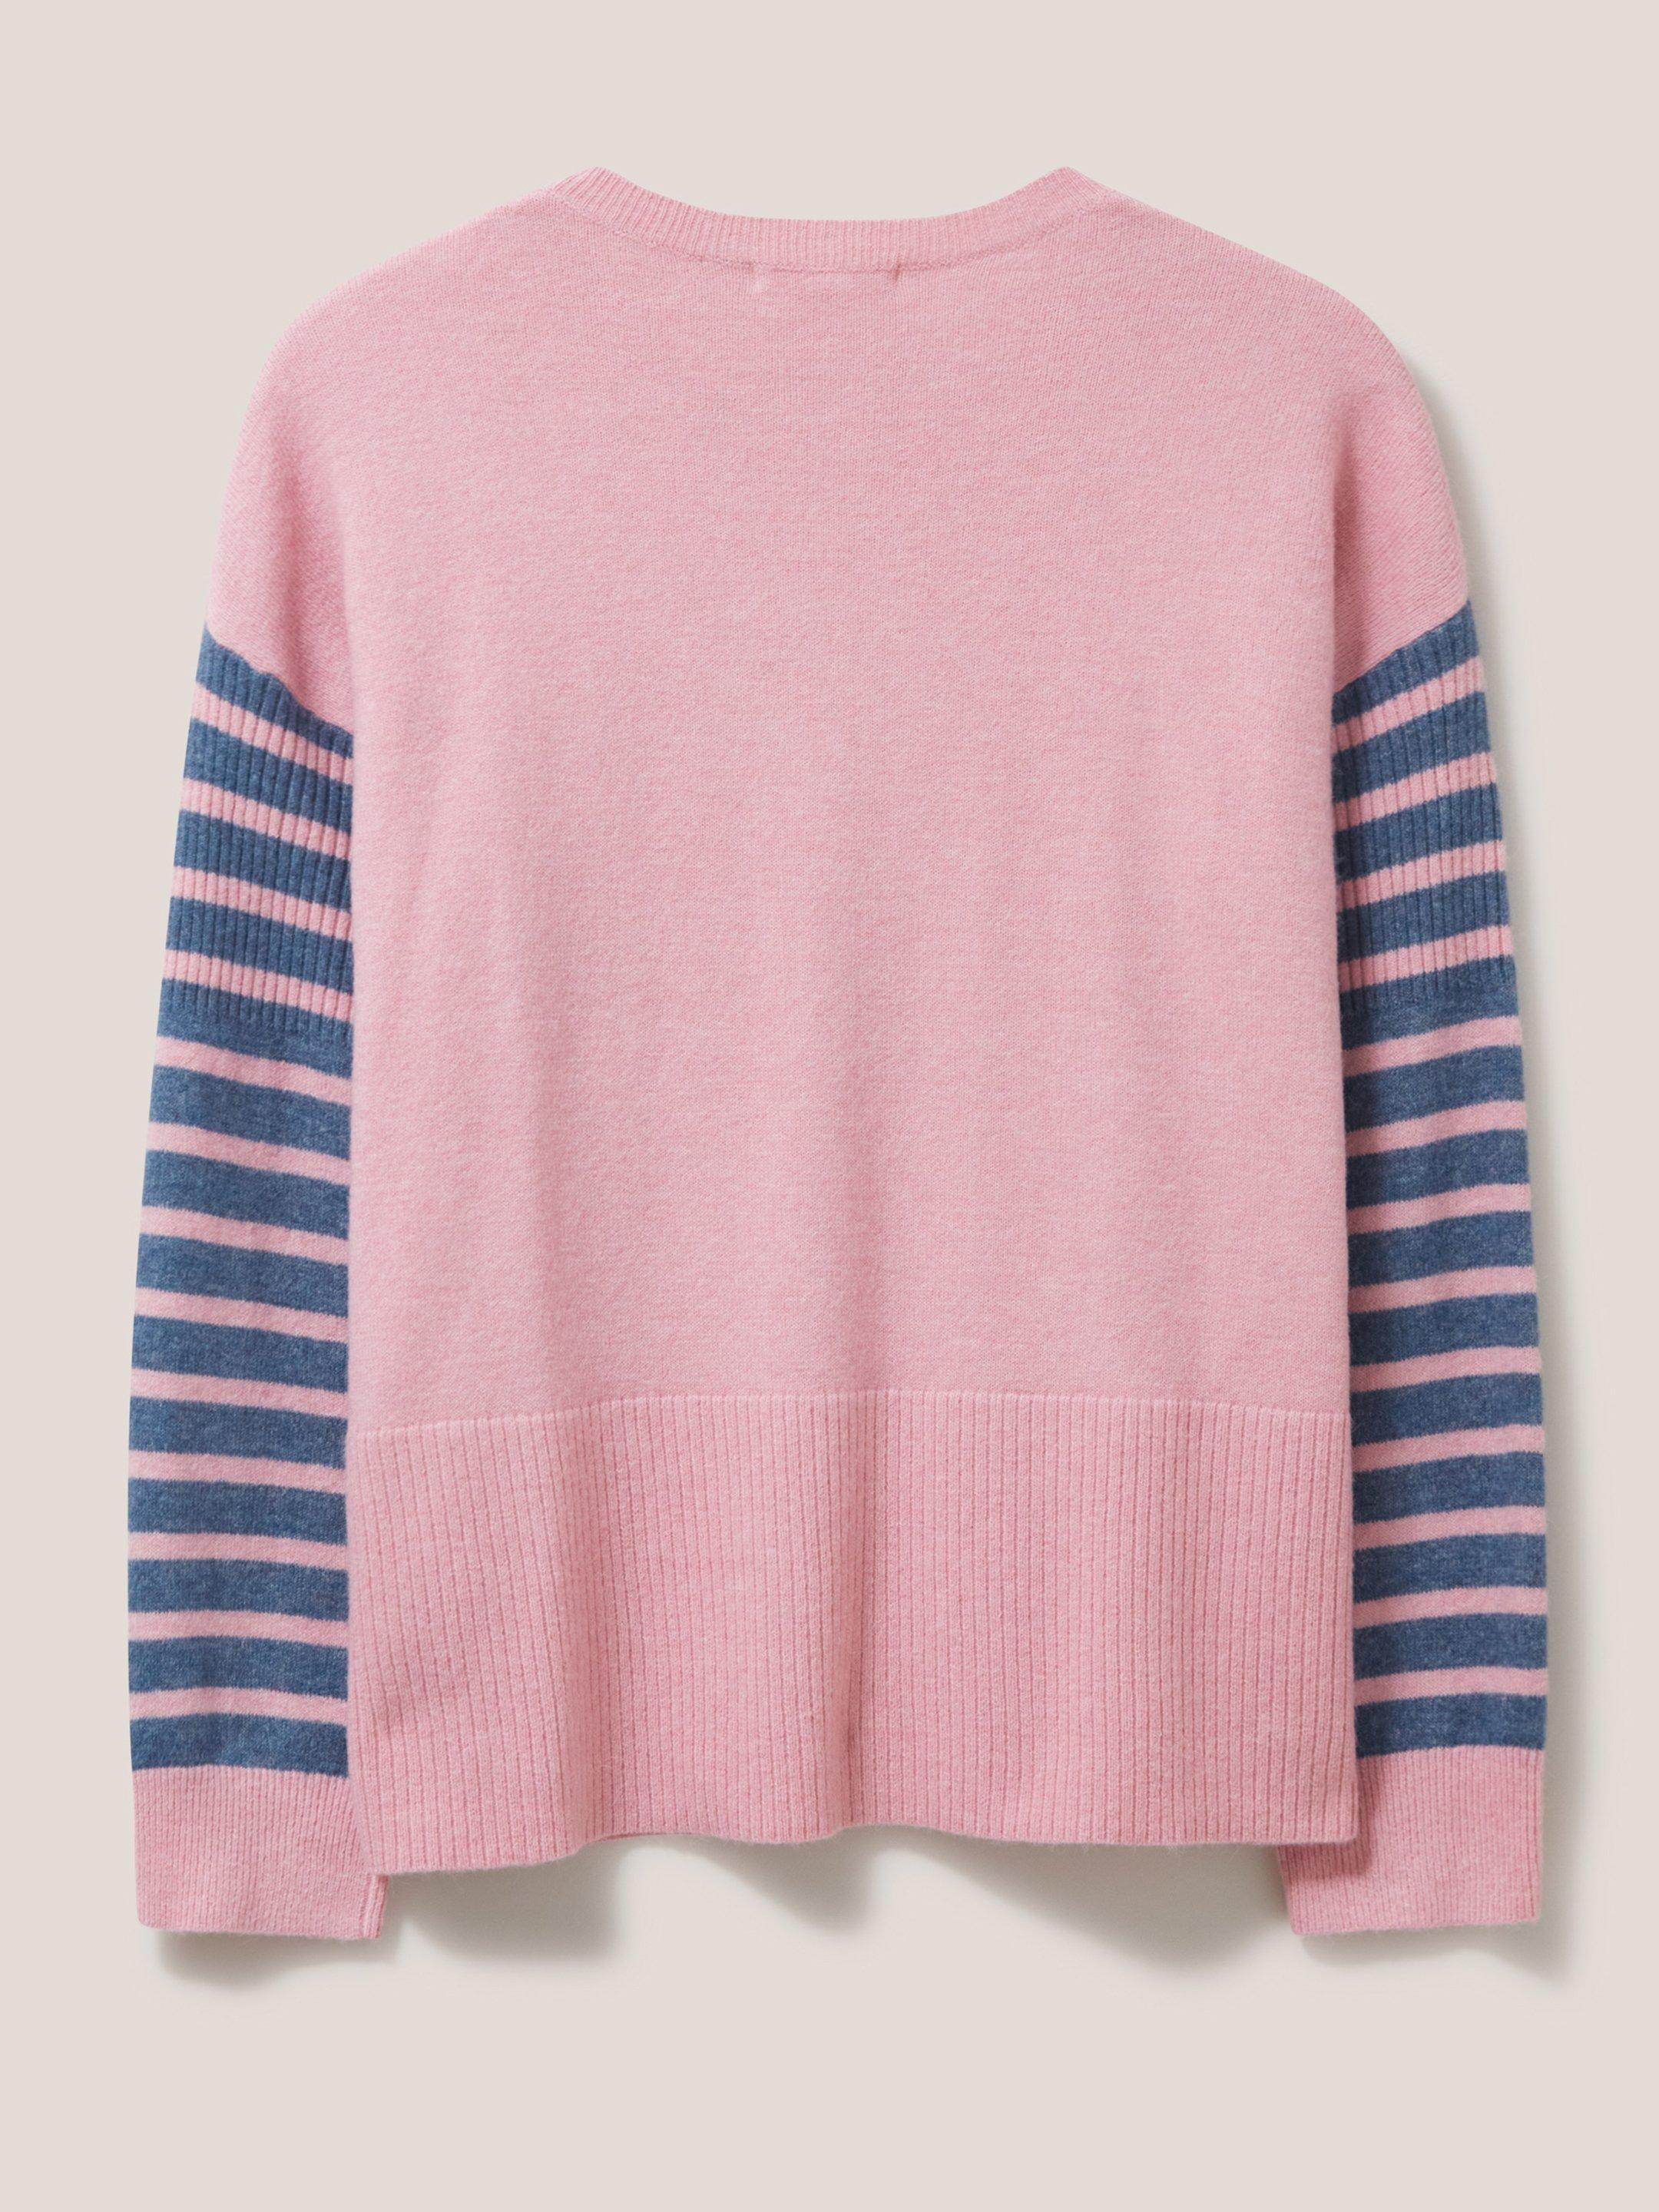 COSY JUMPER in PINK MLT - FLAT BACK